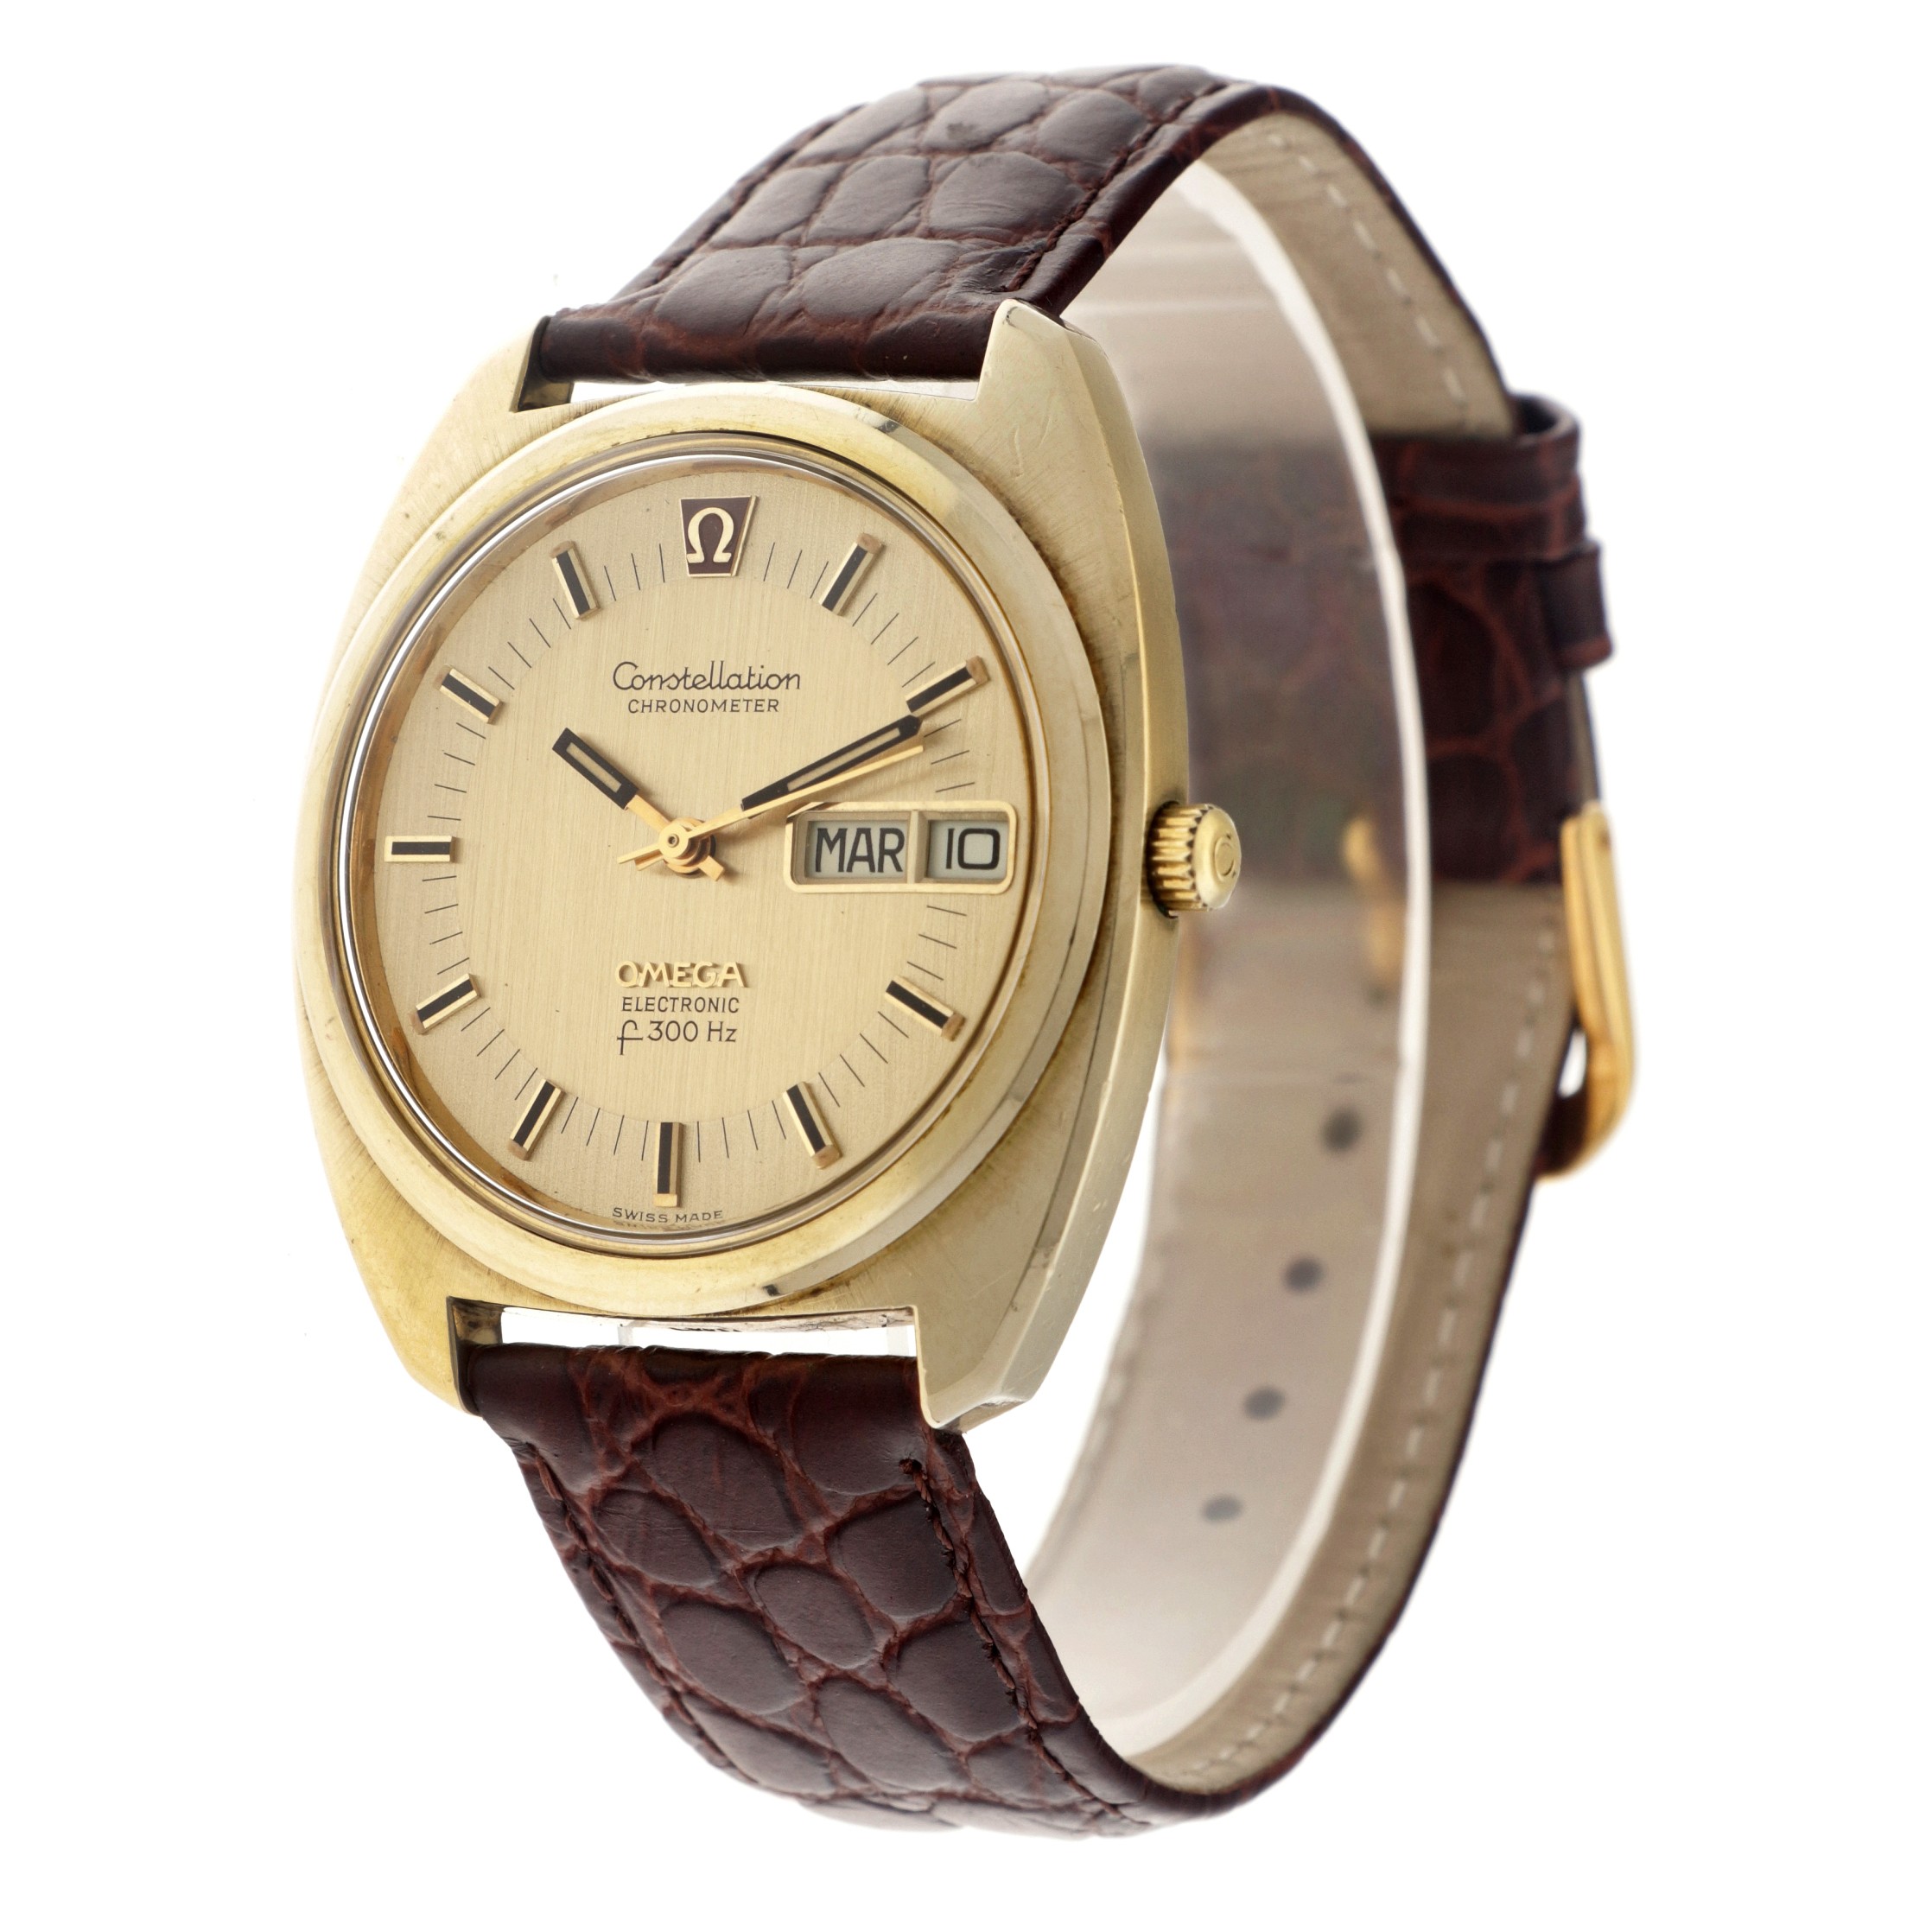 No Reserve - Omega Constellation 300Hz 1980034 - Men's watch - approx. 1973. - Image 2 of 5